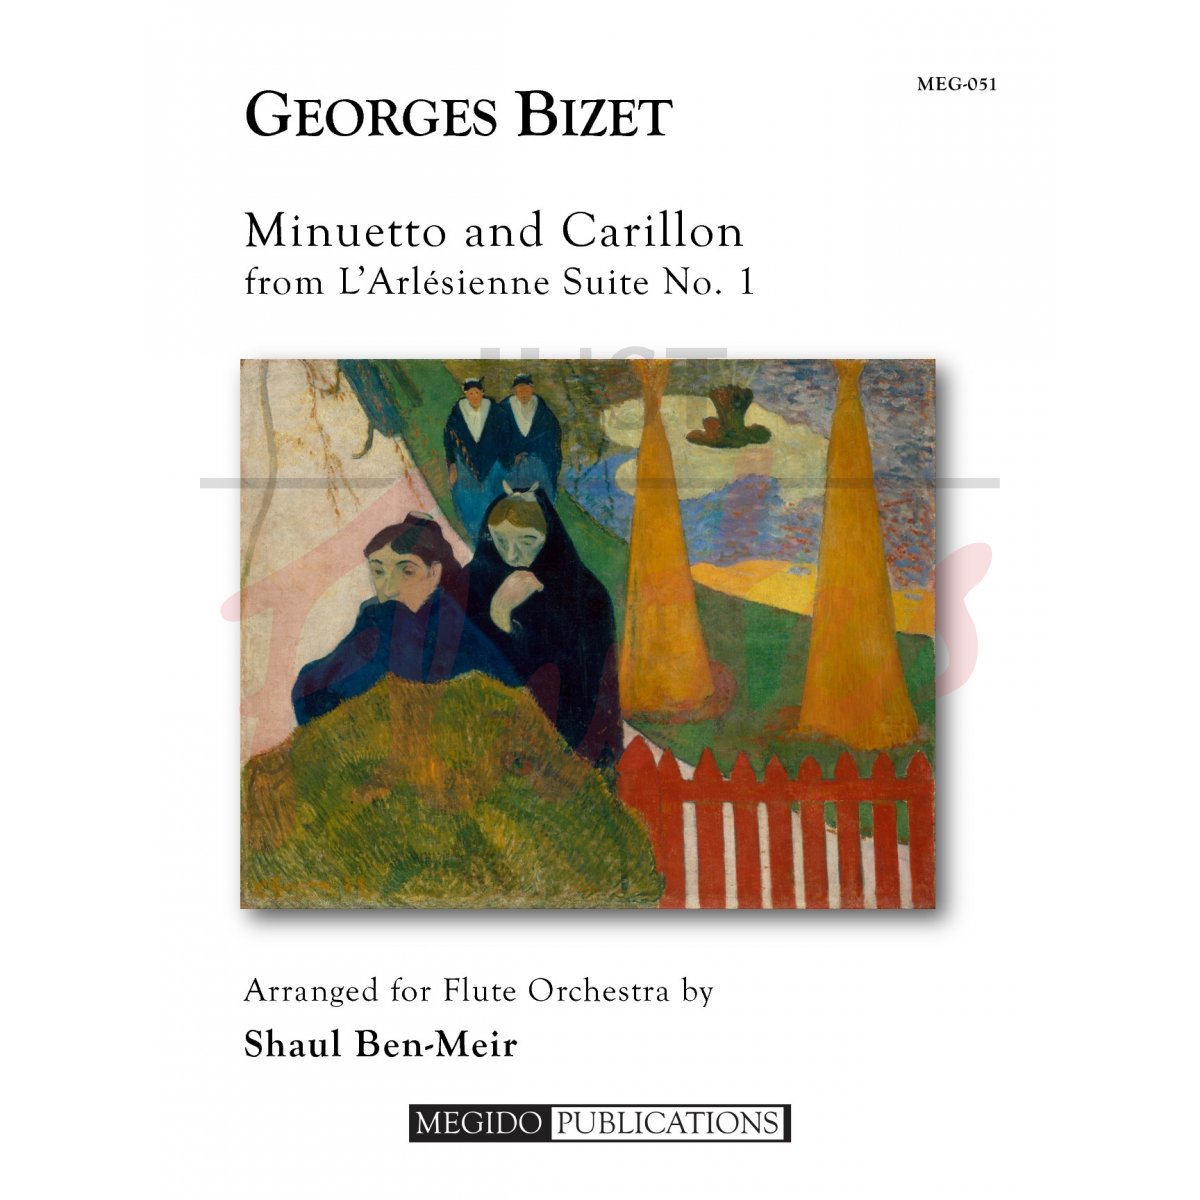 Minuetto and Carillon from L'Arlesienne Suite No. 1